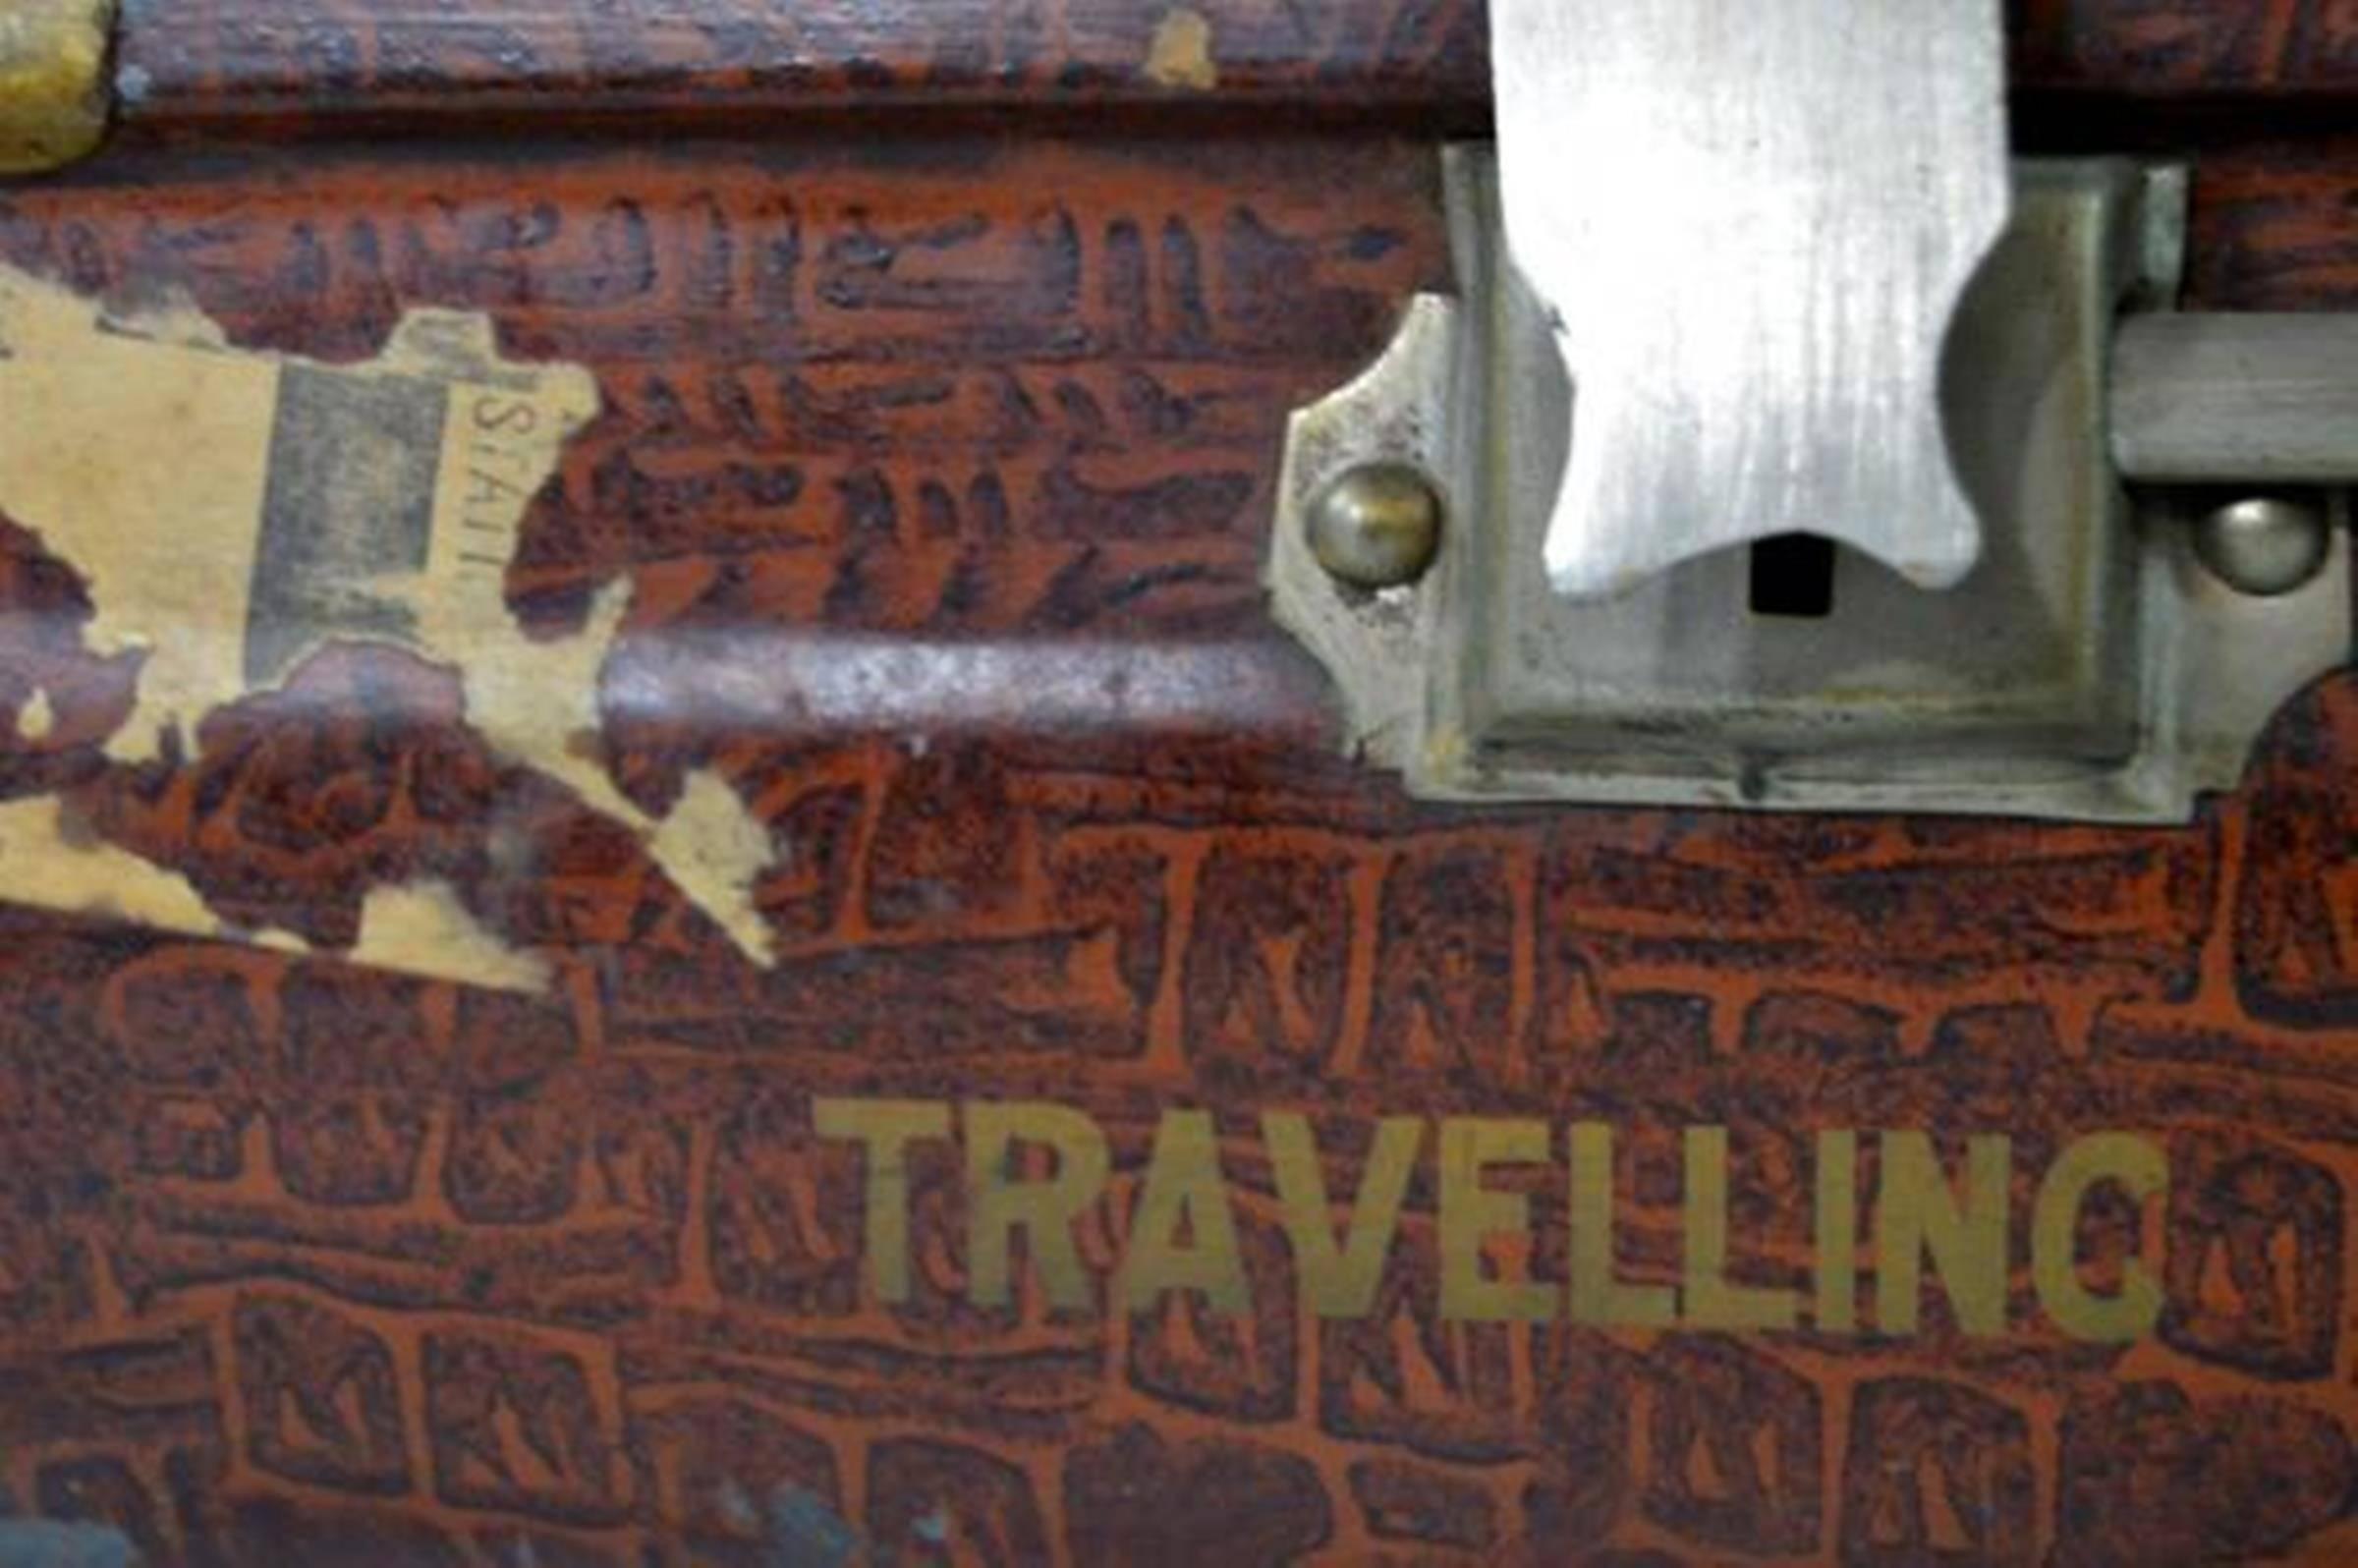 European Antique British Wilkes & Son Locked Metal Trunk for Export, circa 1800 For Sale